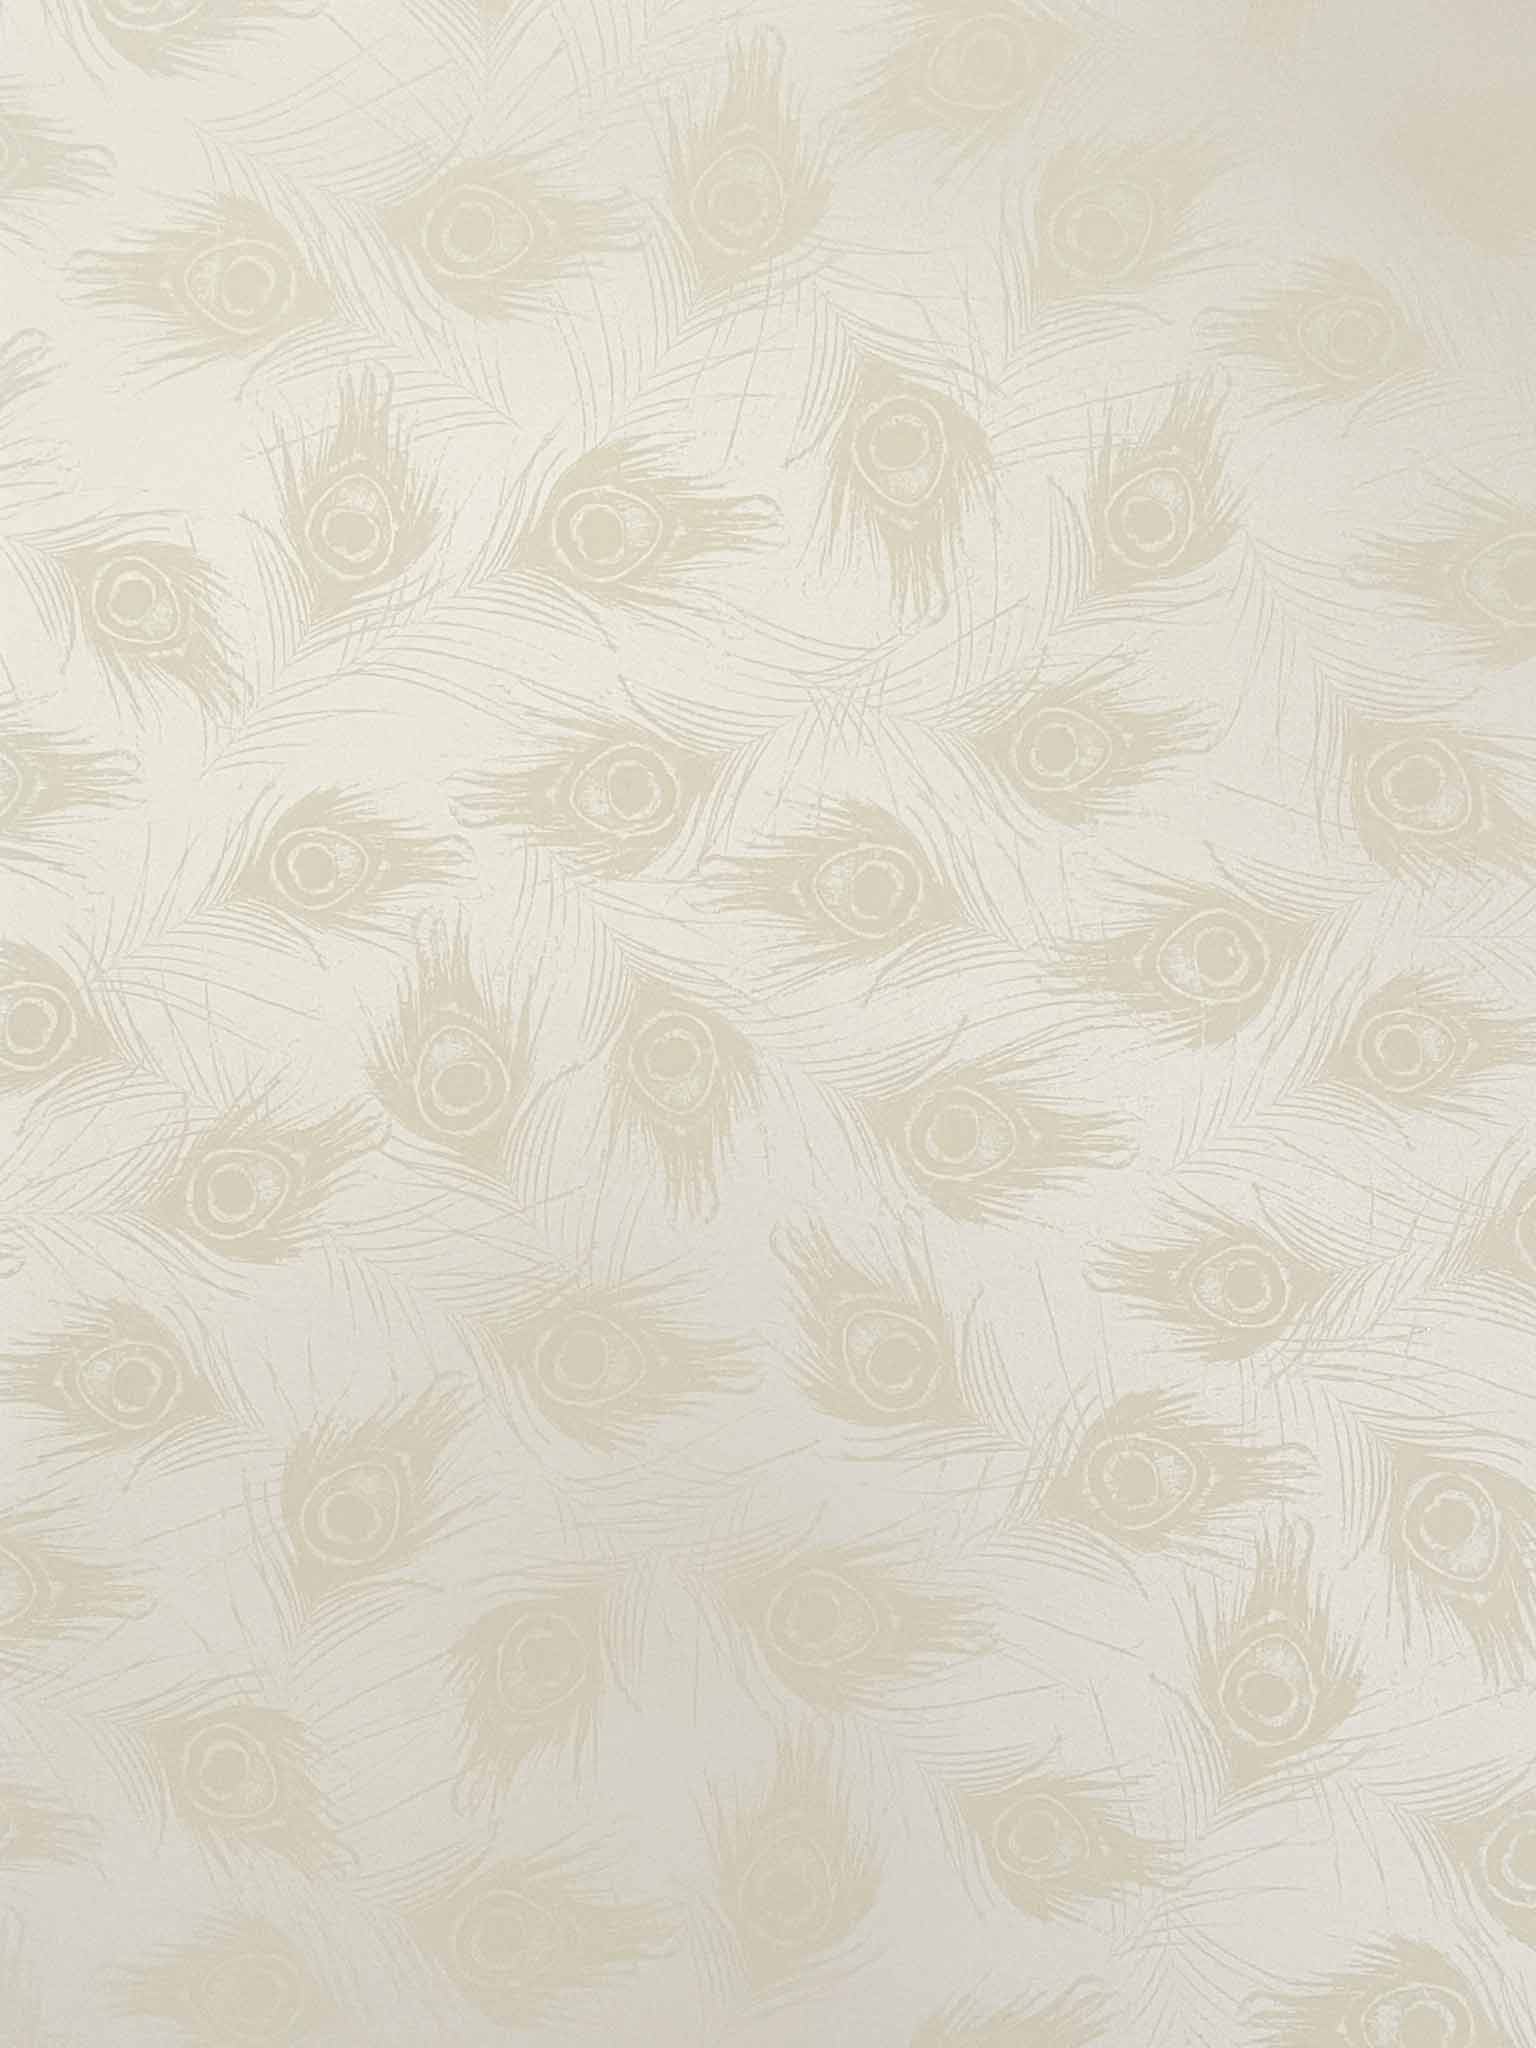 pavone-paper-ivory-paper-with-peacock-feather-pattern